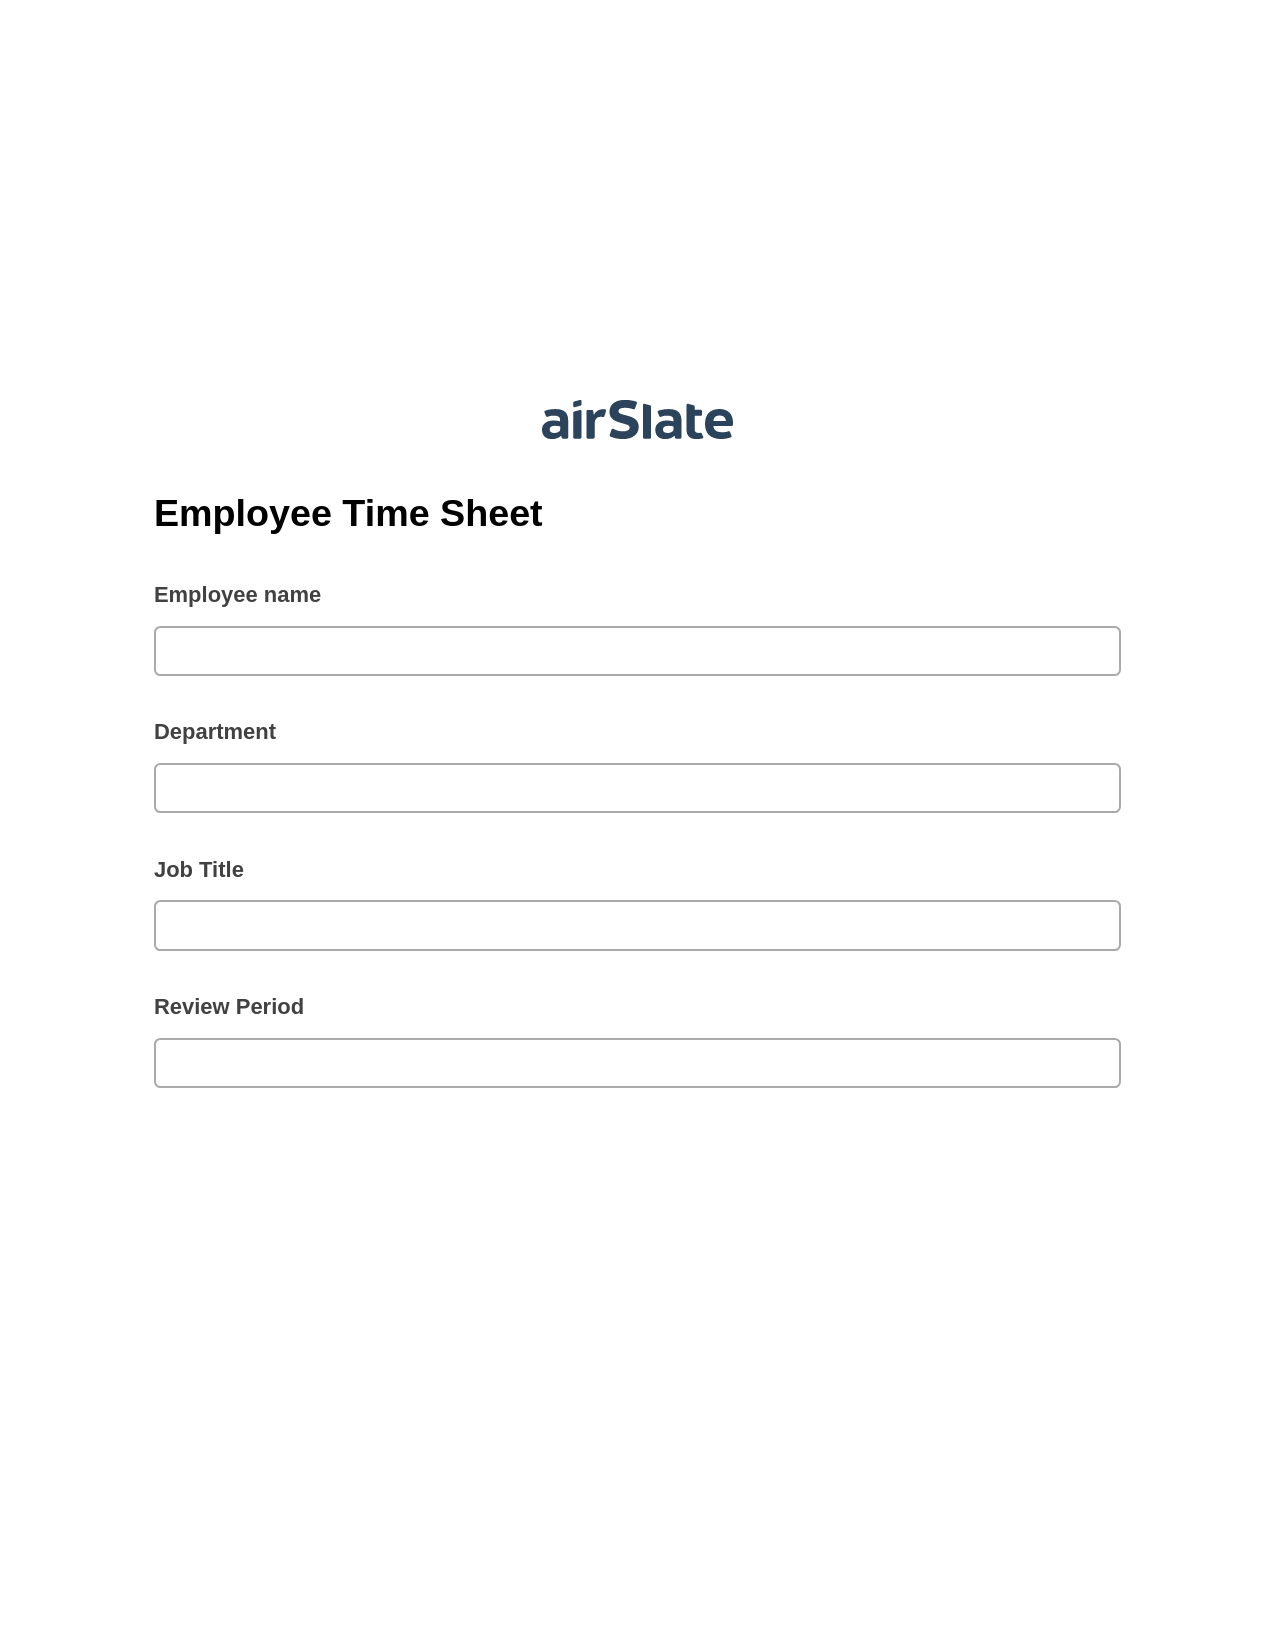 Multirole Employee Time Sheet Pre-fill from Smartsheet Bot, Update Audit Trail Bot, Archive to Box Bot